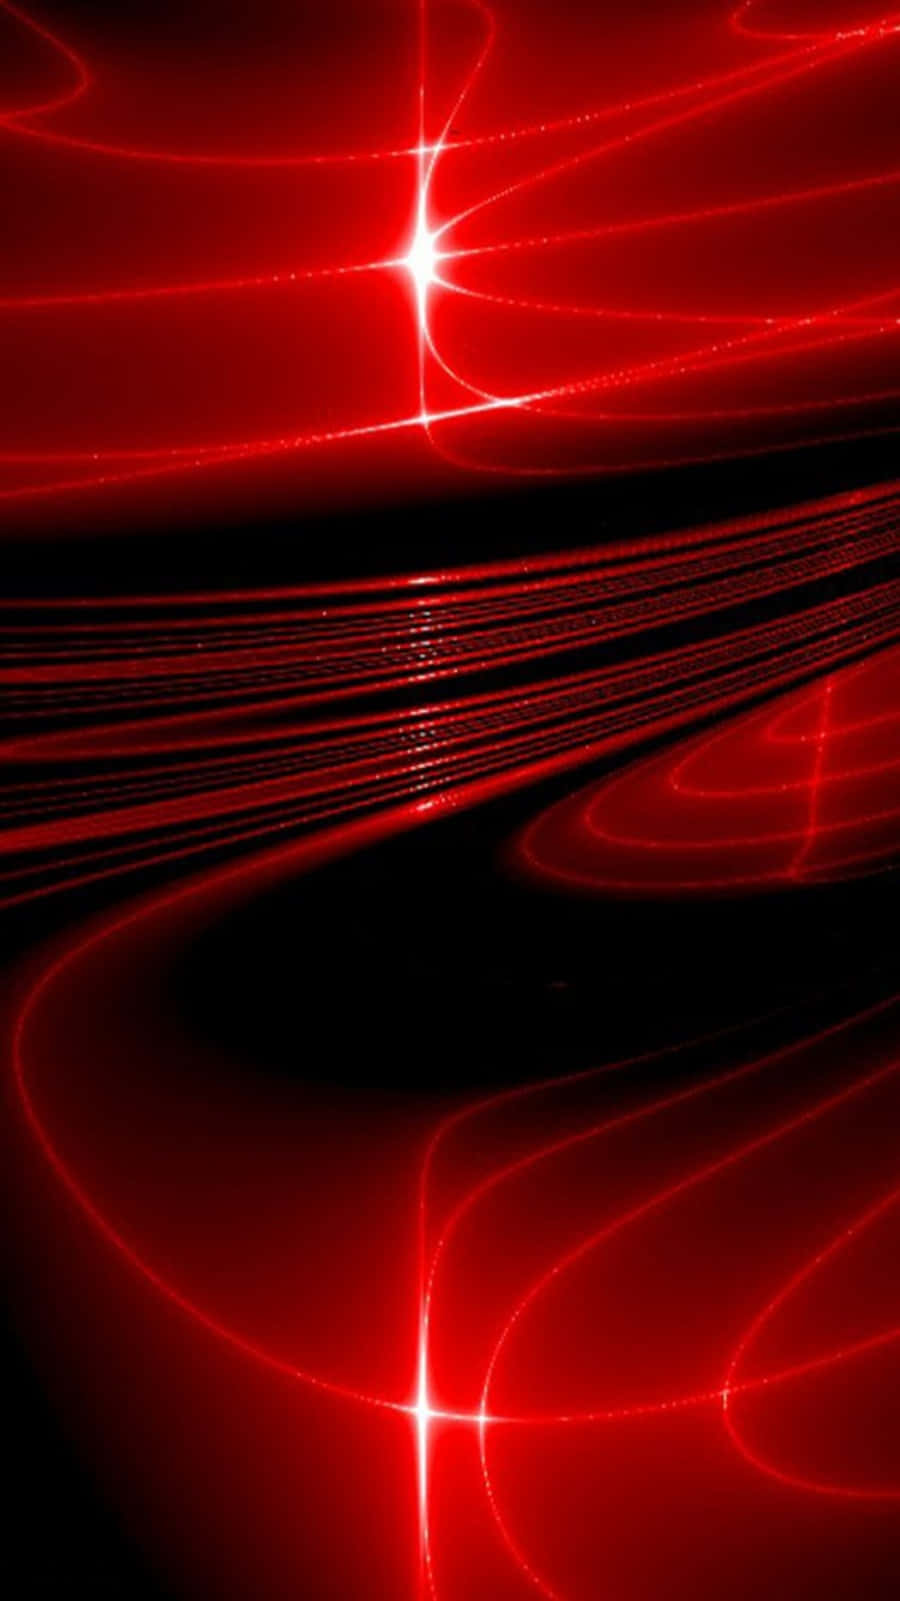 iPhone11papers.com | iPhone11 wallpaper | mn16-space-red -bigbang-star-art-nature